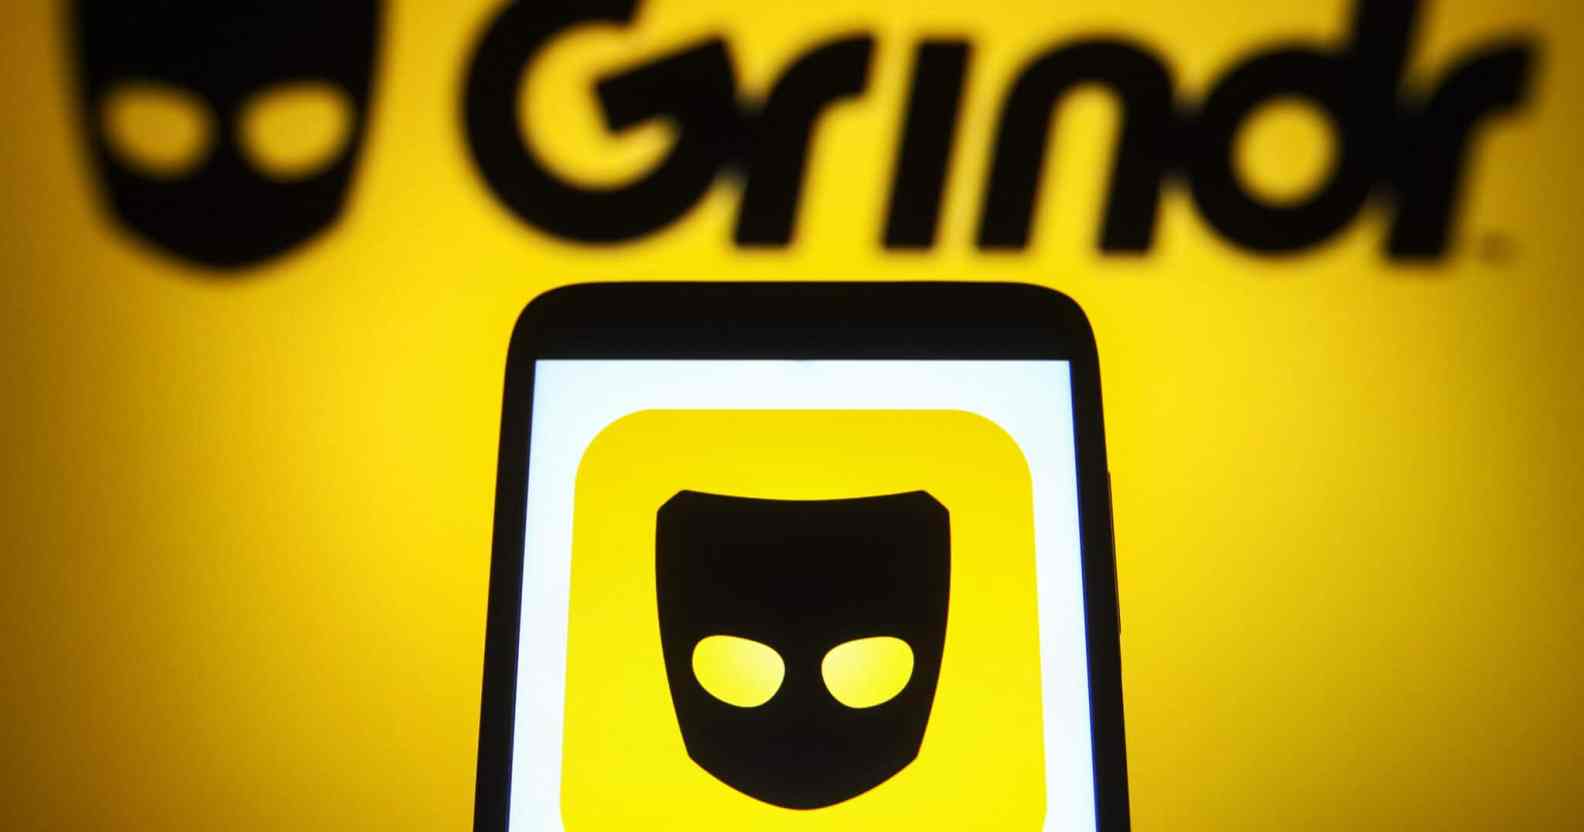 Grindr depicted on a phone